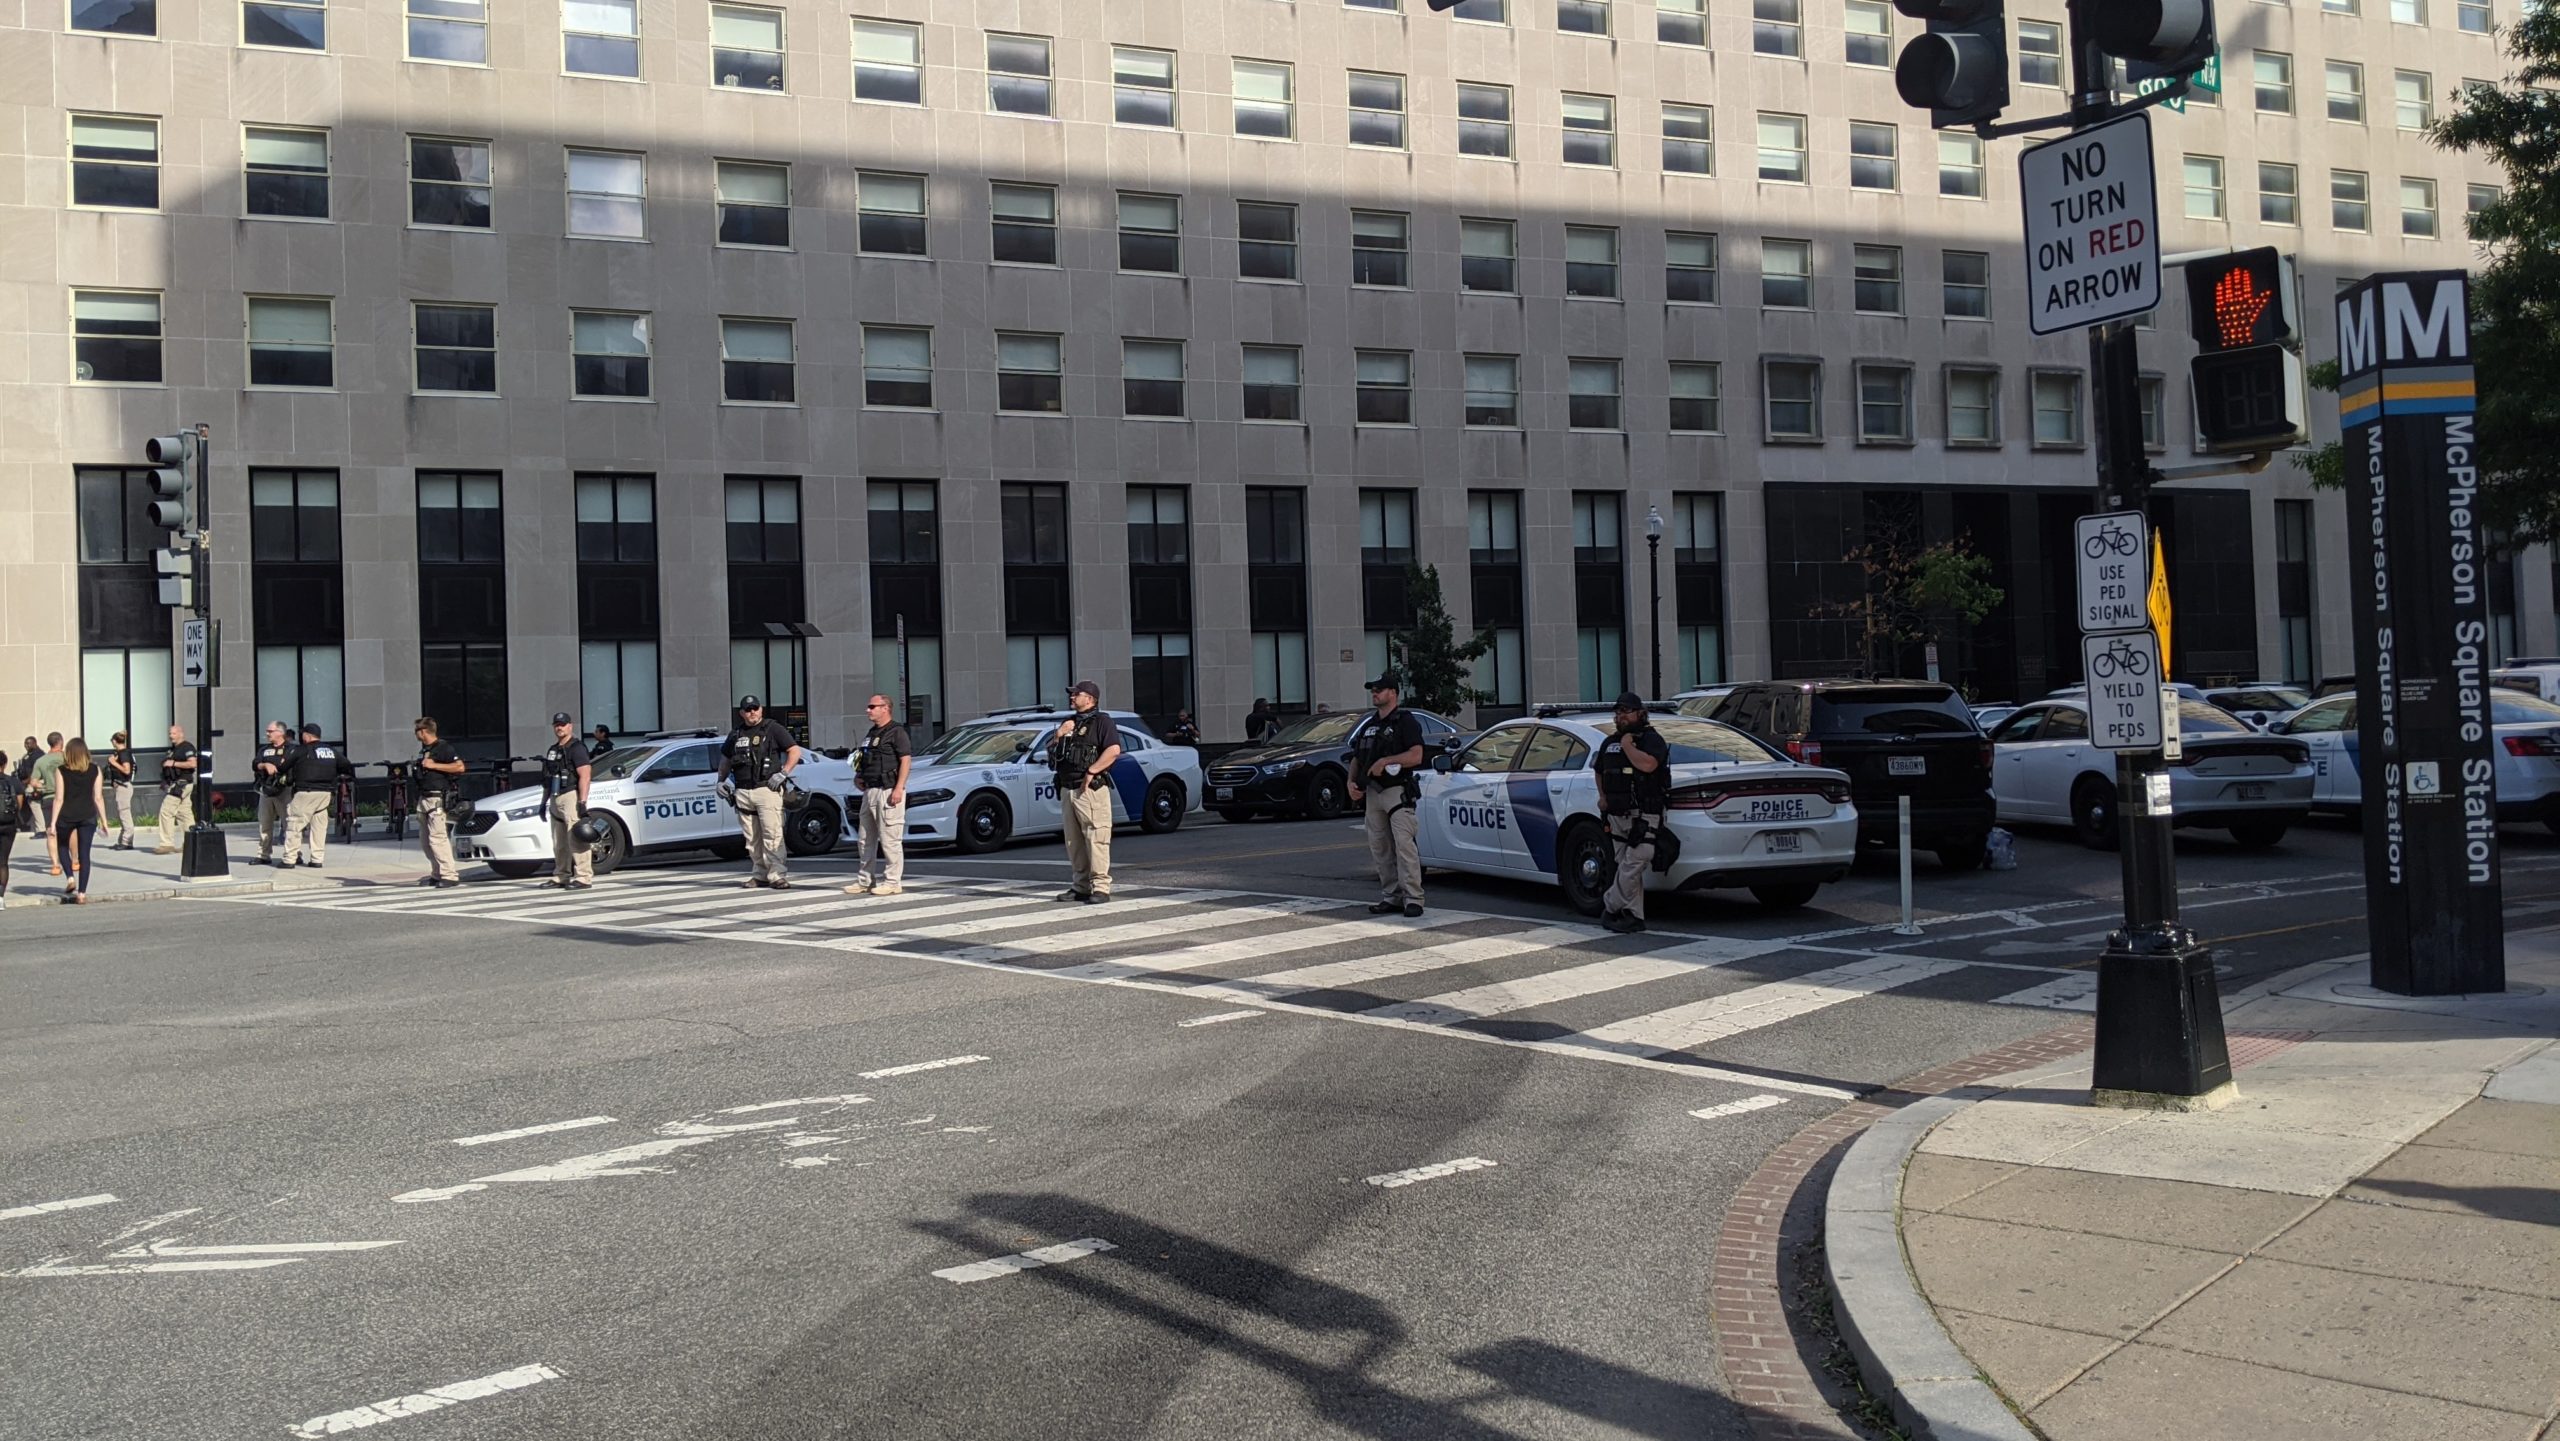 Police cutting off an intersection near the White House on June 2, 2020. (Photo: Tom McKay, Gizmodo)